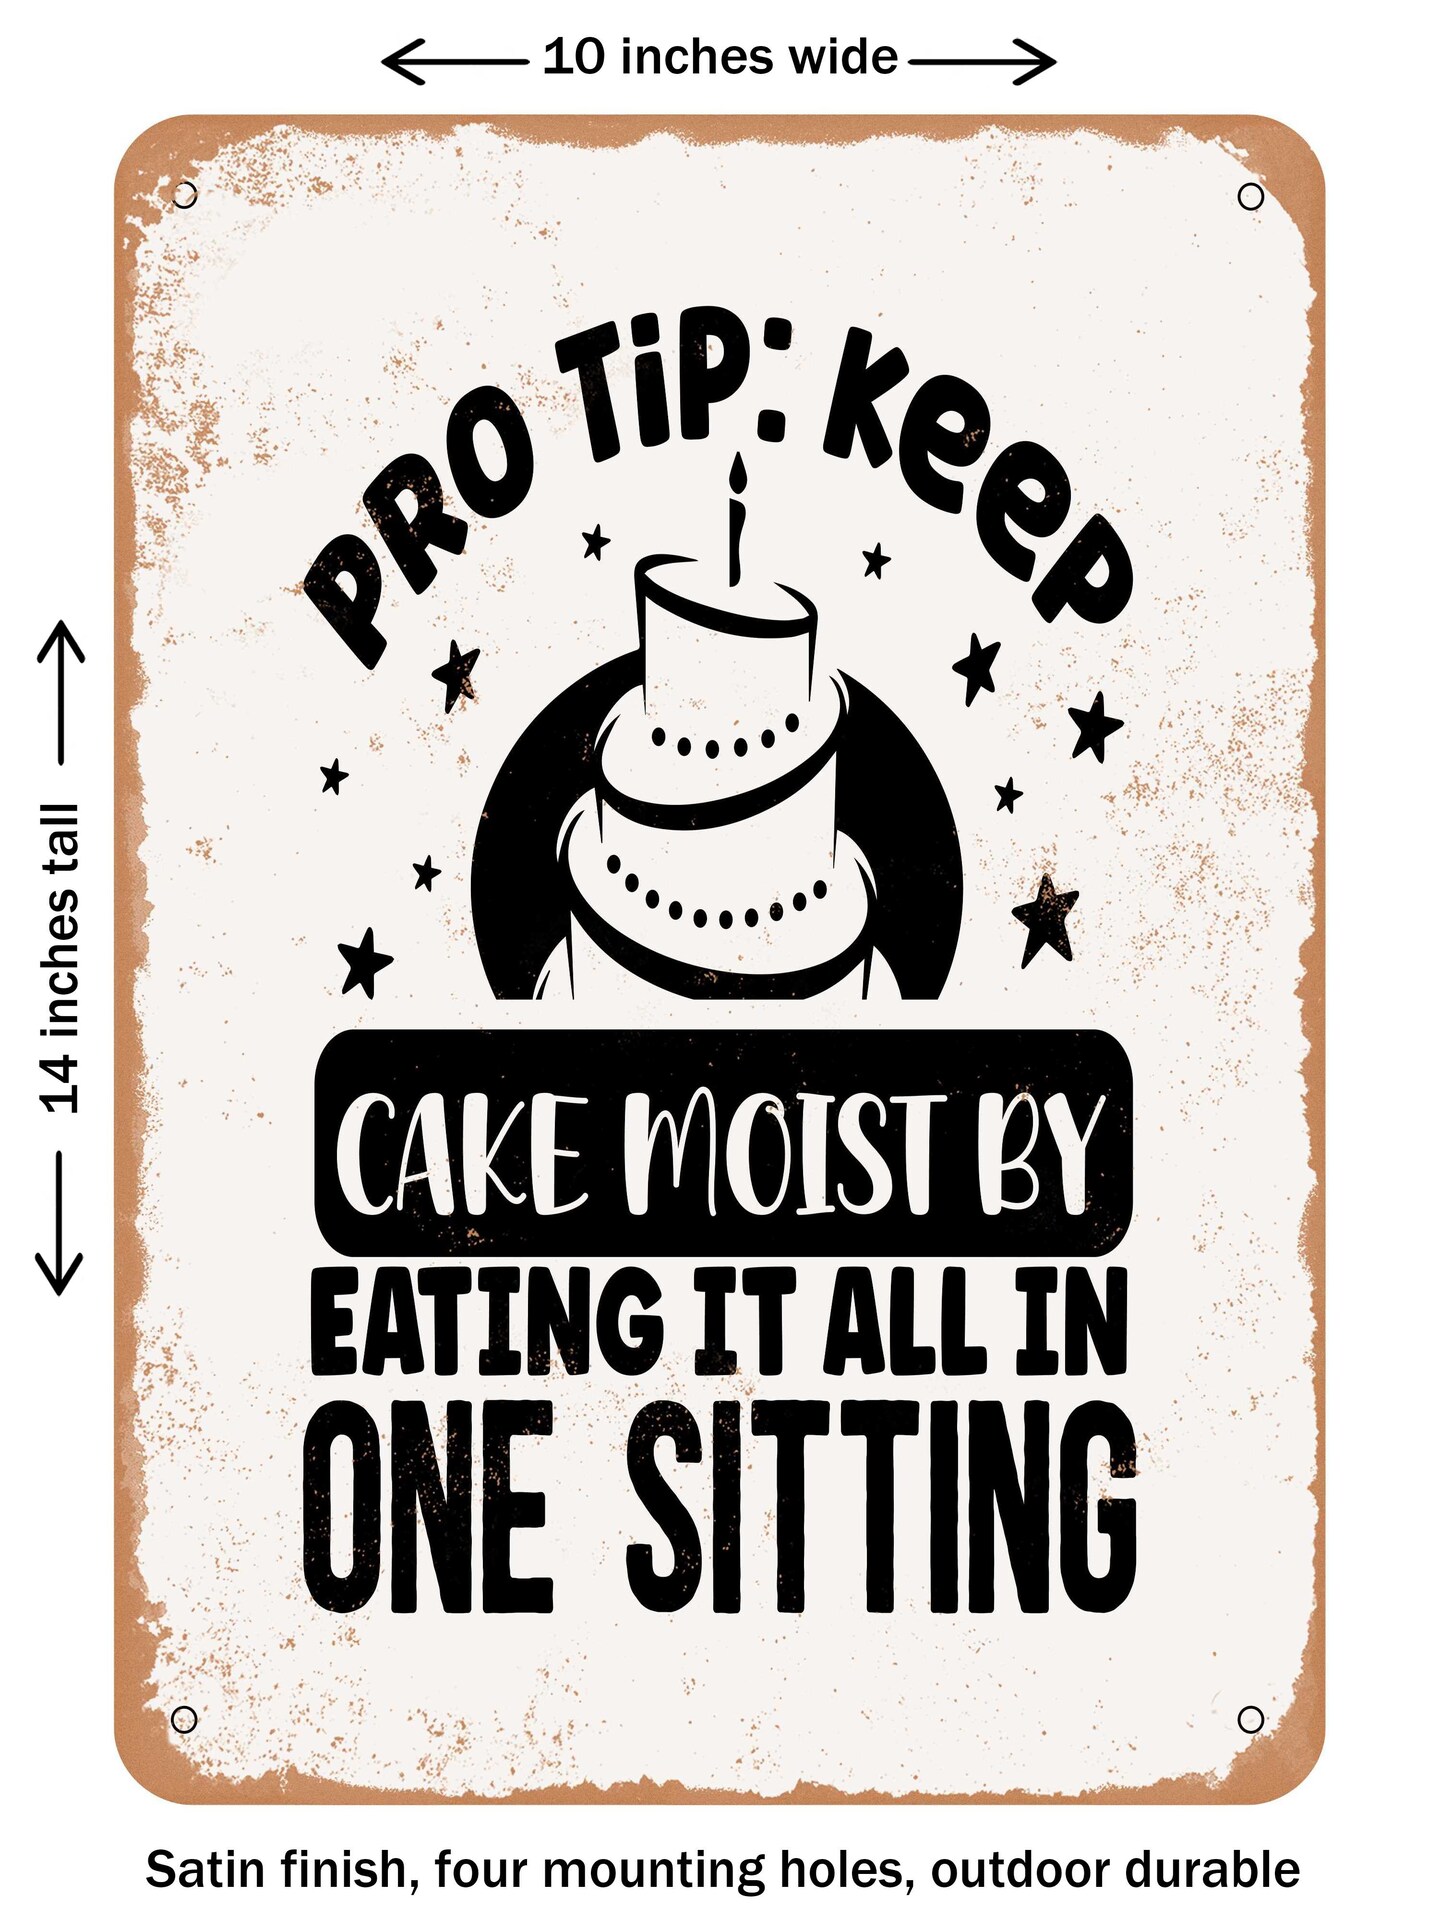 DECORATIVE METAL SIGN - Pro Tip Keep Cake Moist by Eating It All In One Sitting  - Vintage Rusty Look